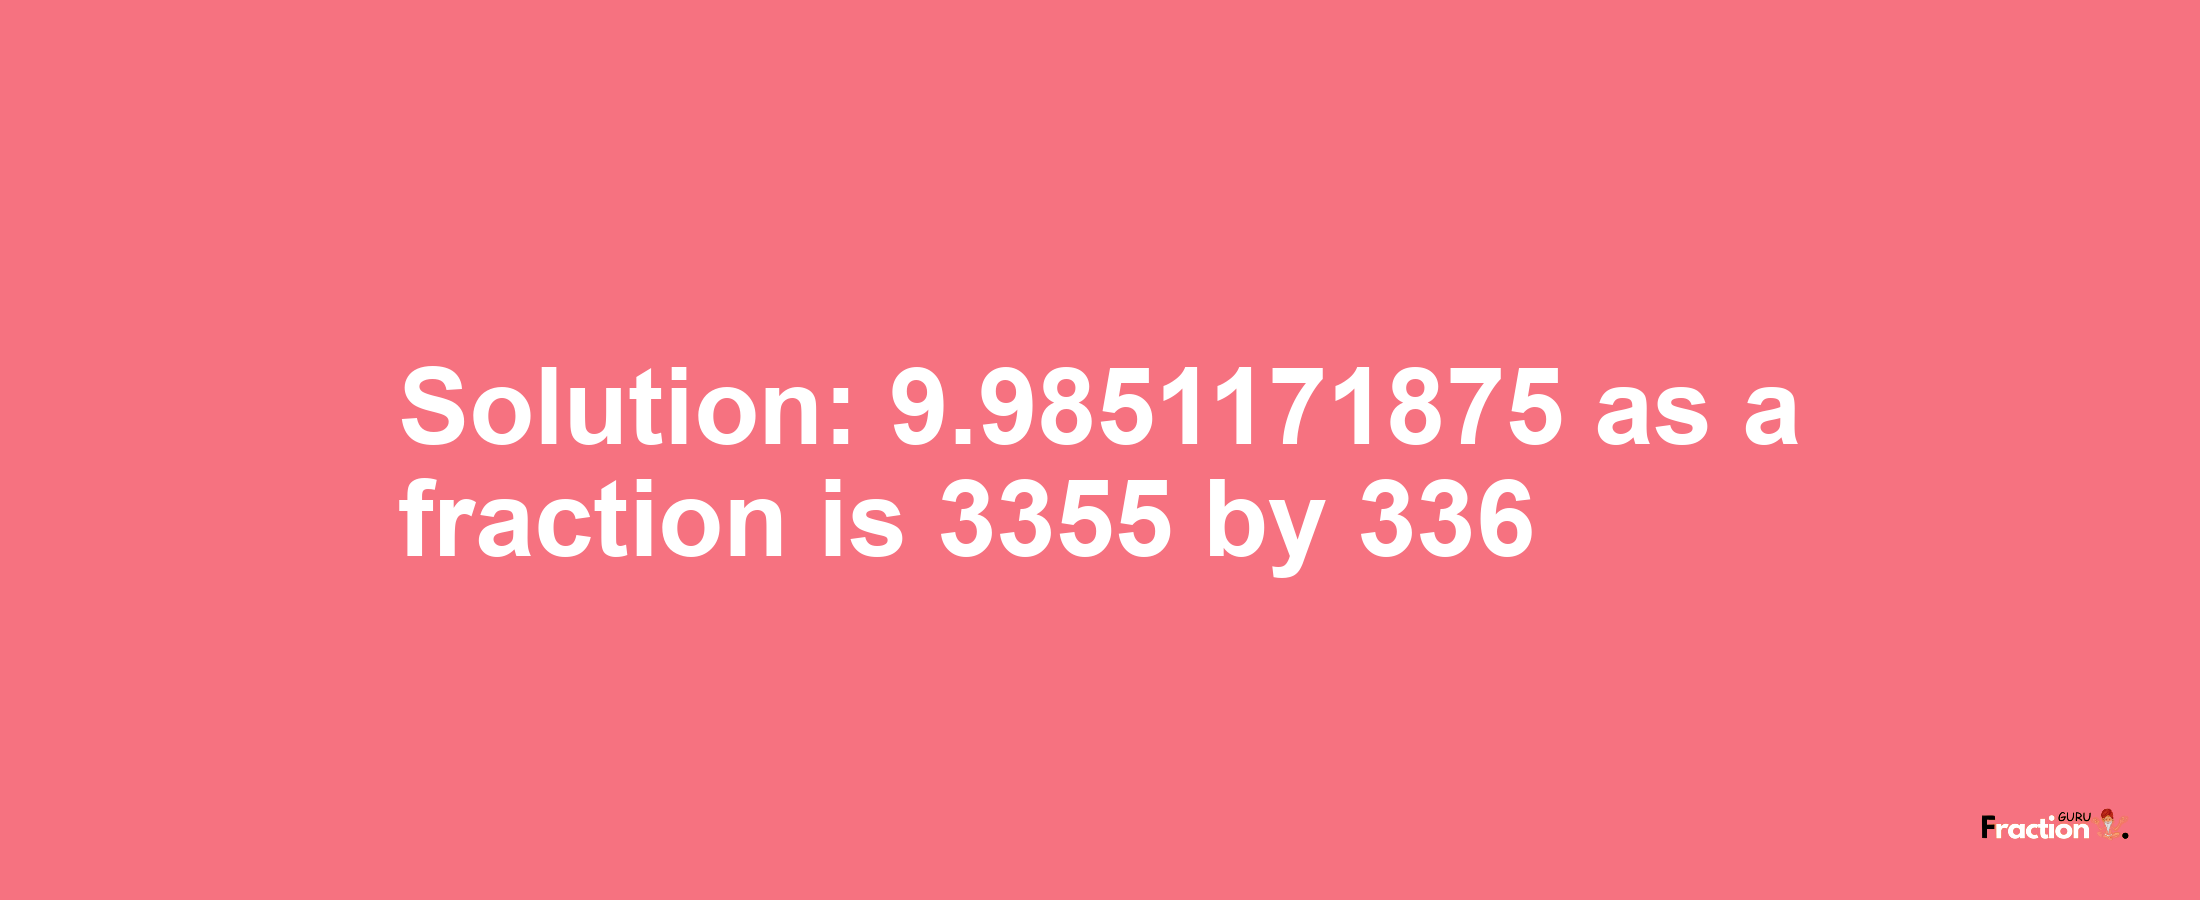 Solution:9.9851171875 as a fraction is 3355/336